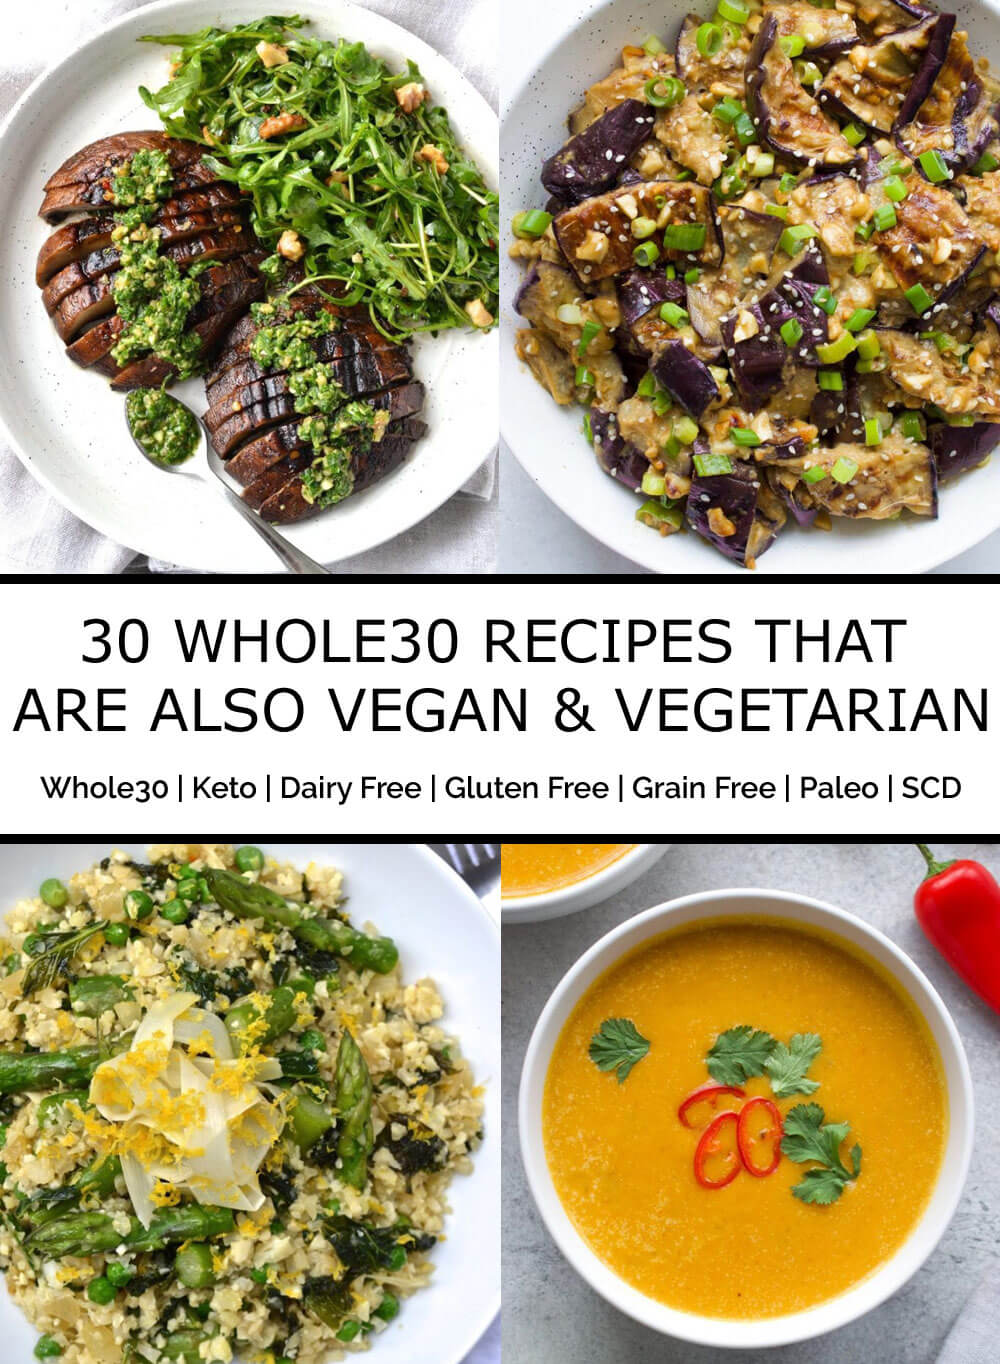 Delicious and Healthy Whole30 Grocery Shopping List